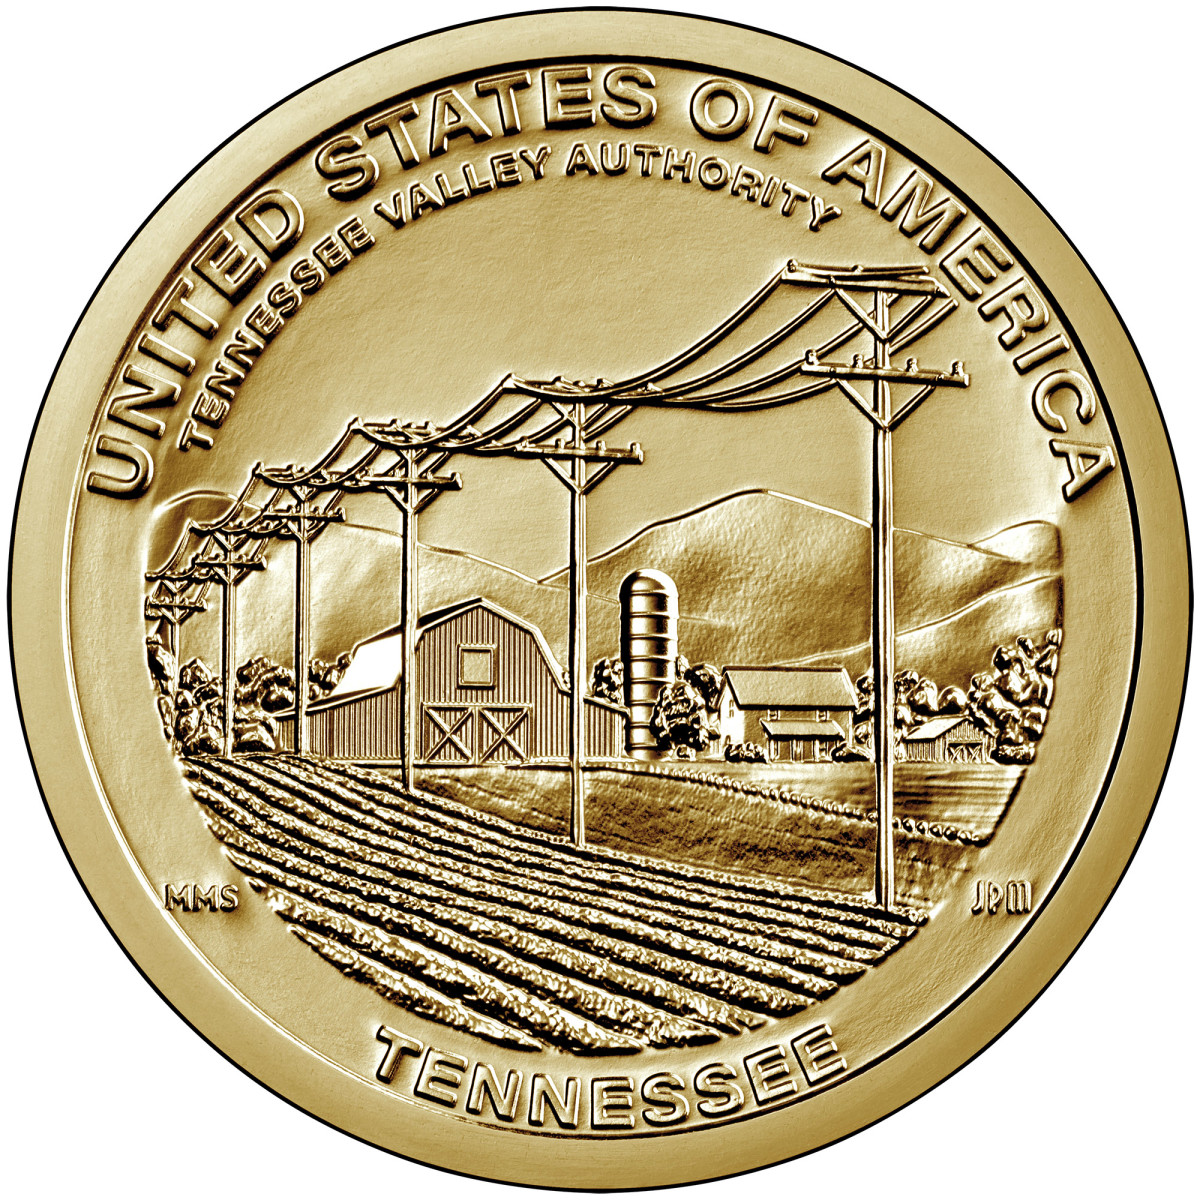 2022 American Innovation dollar honoring the state of Tennessee. (Image courtesy United States Mint.)